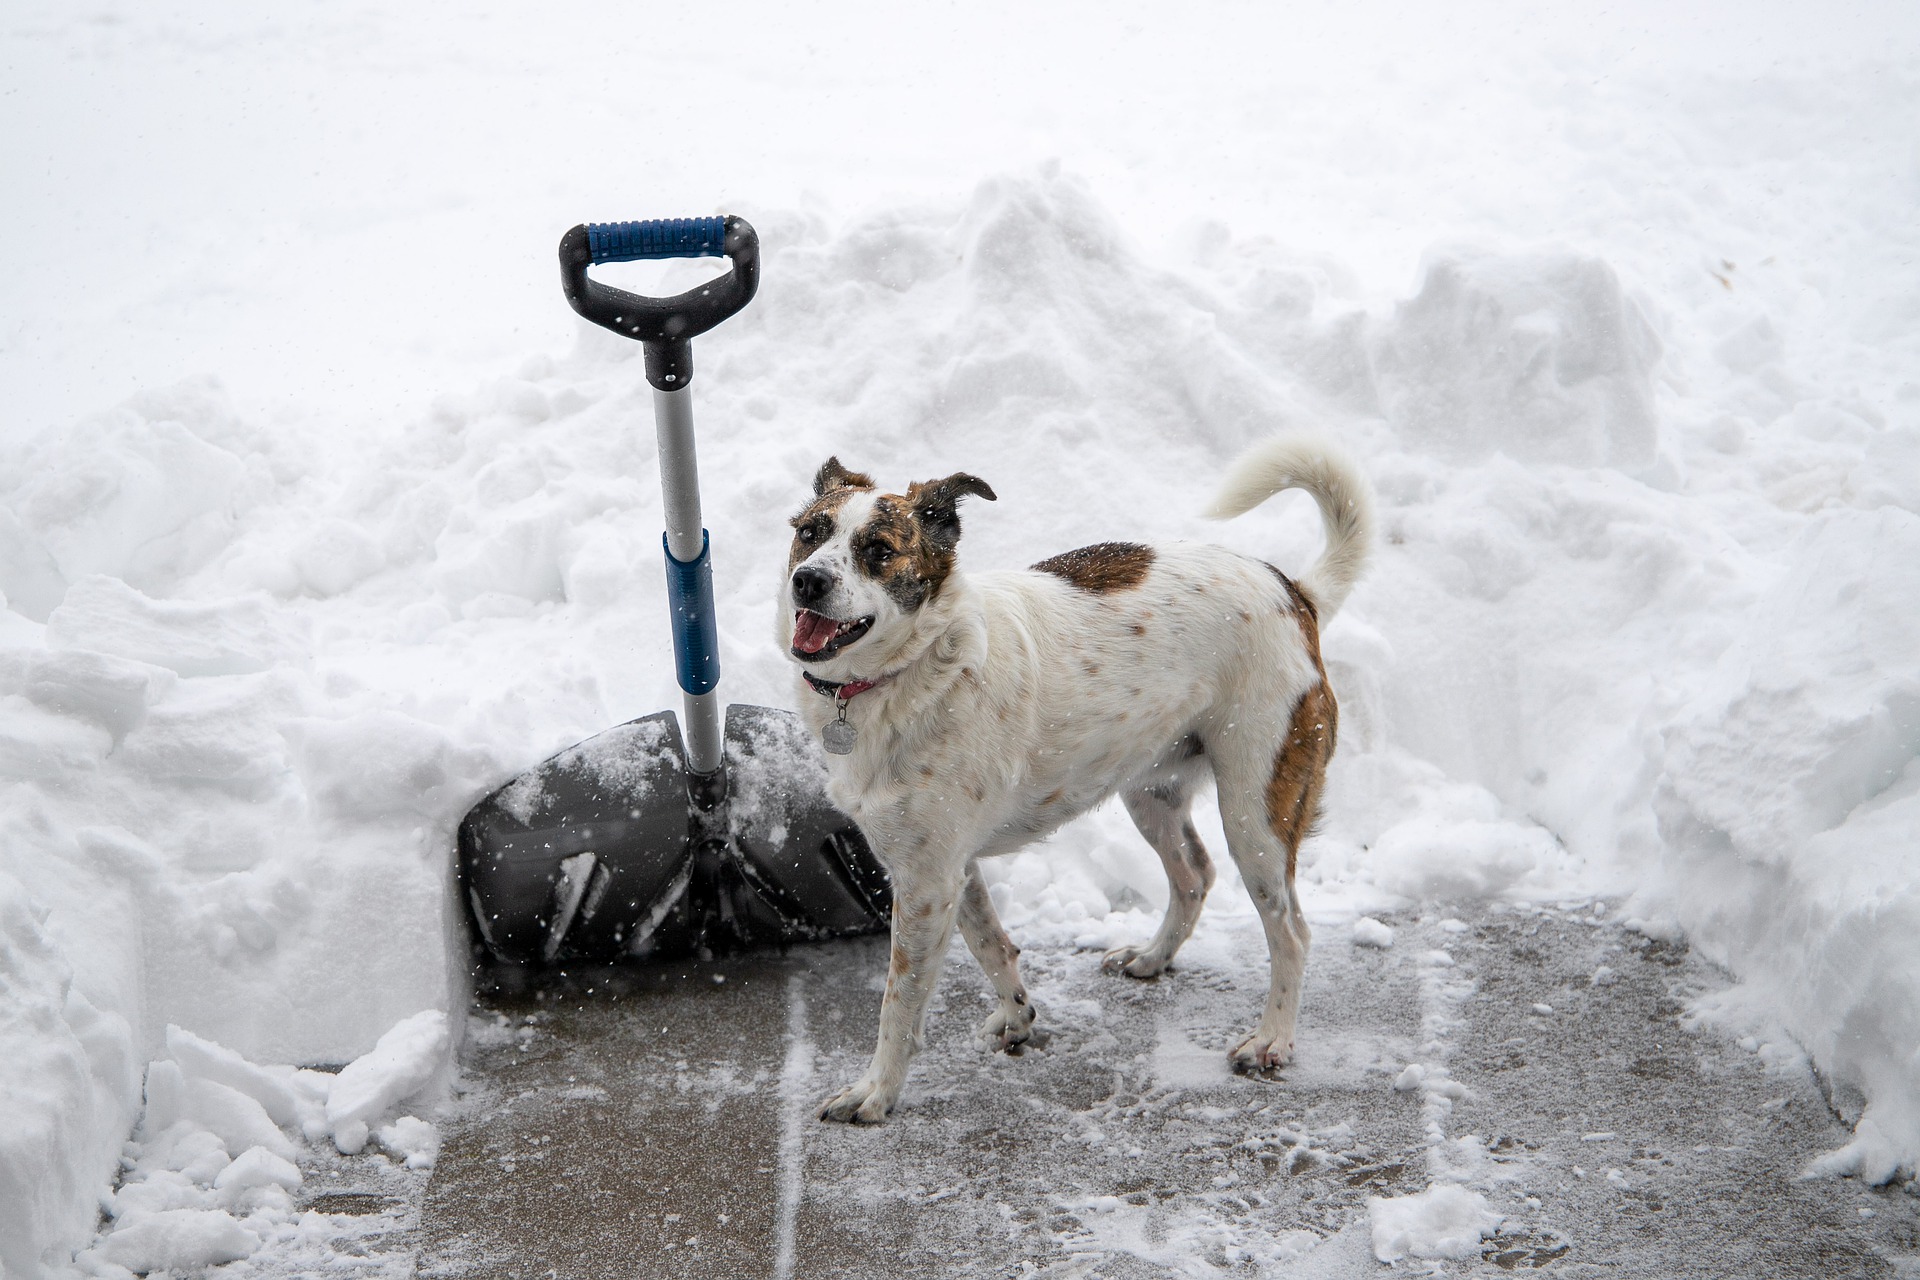 Photo of a dog and a show shovel